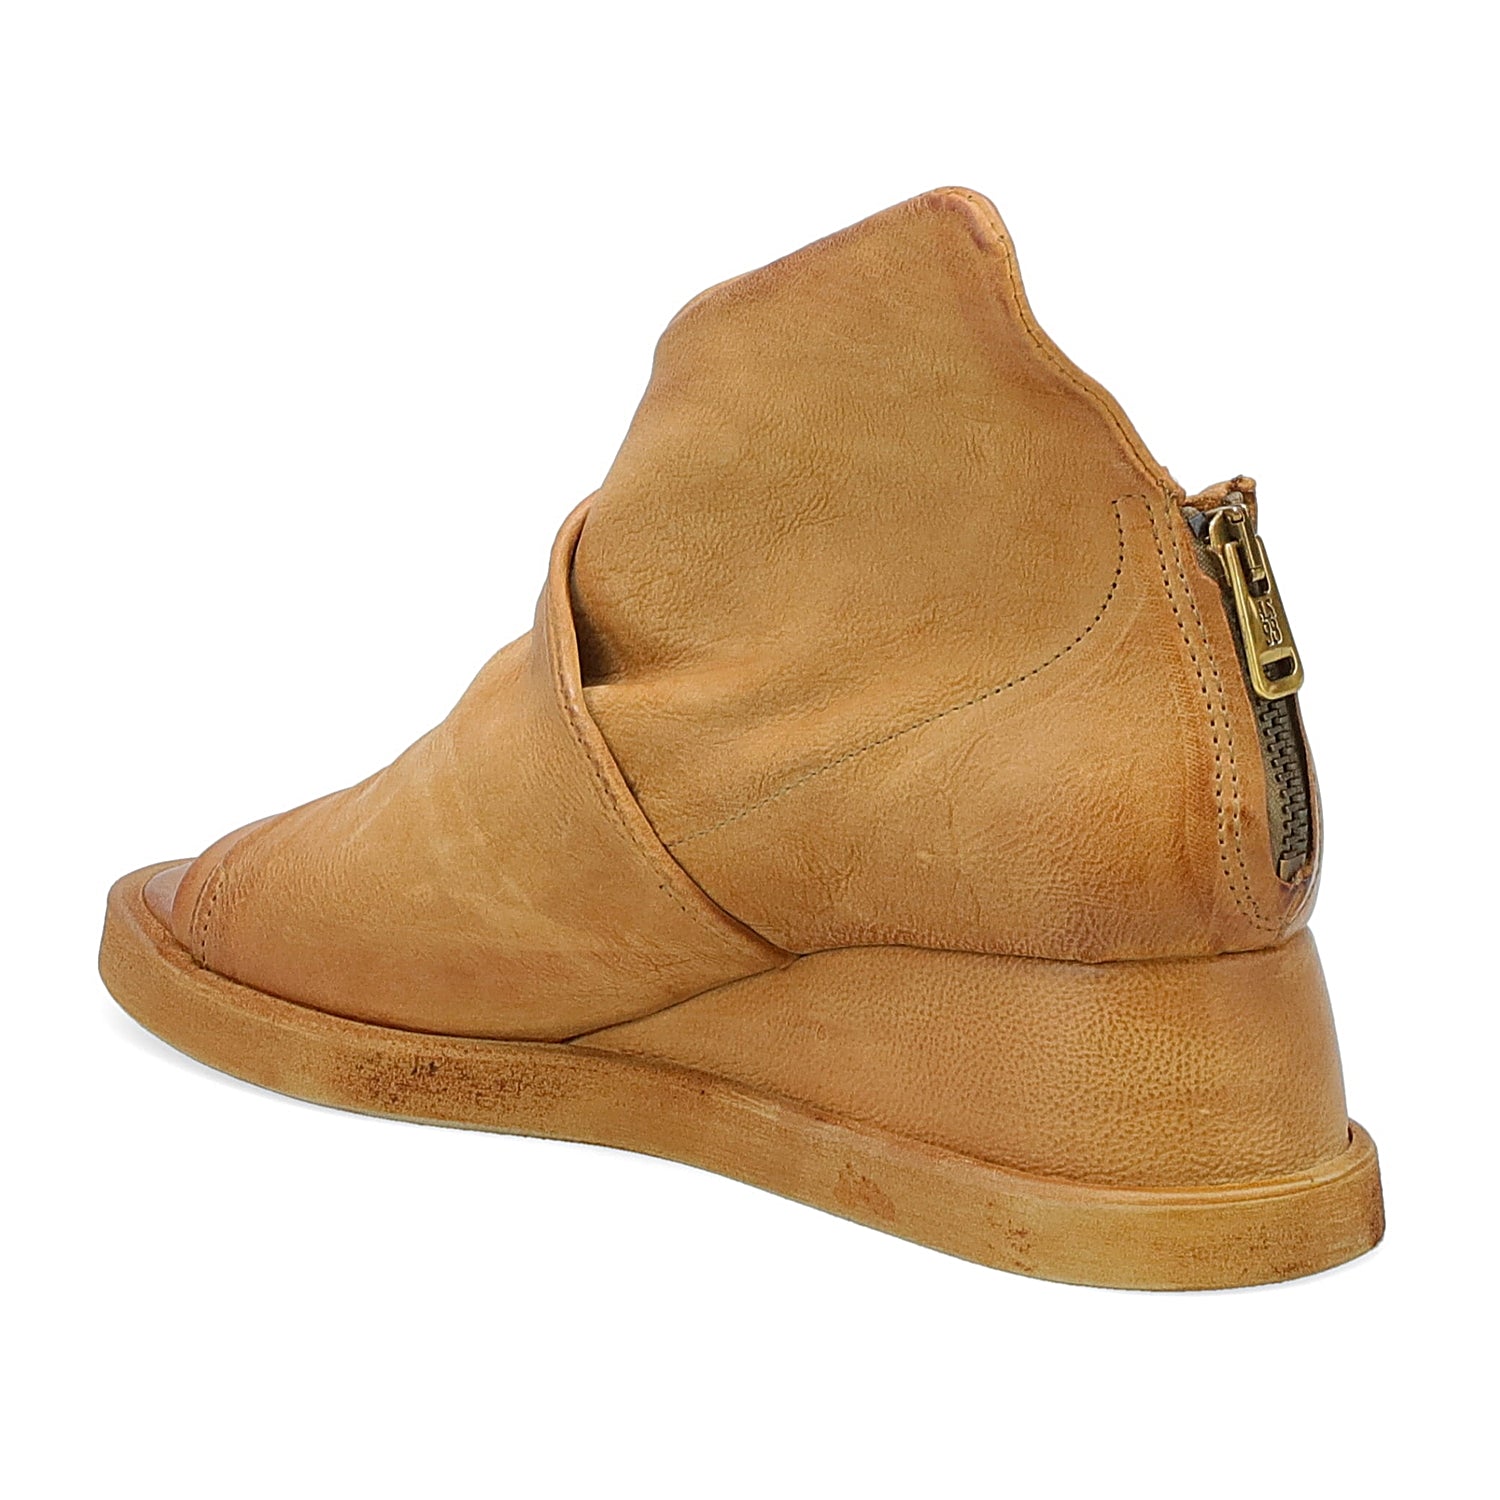 inner back side view of the A.S.98 Craig wedge in Camel.